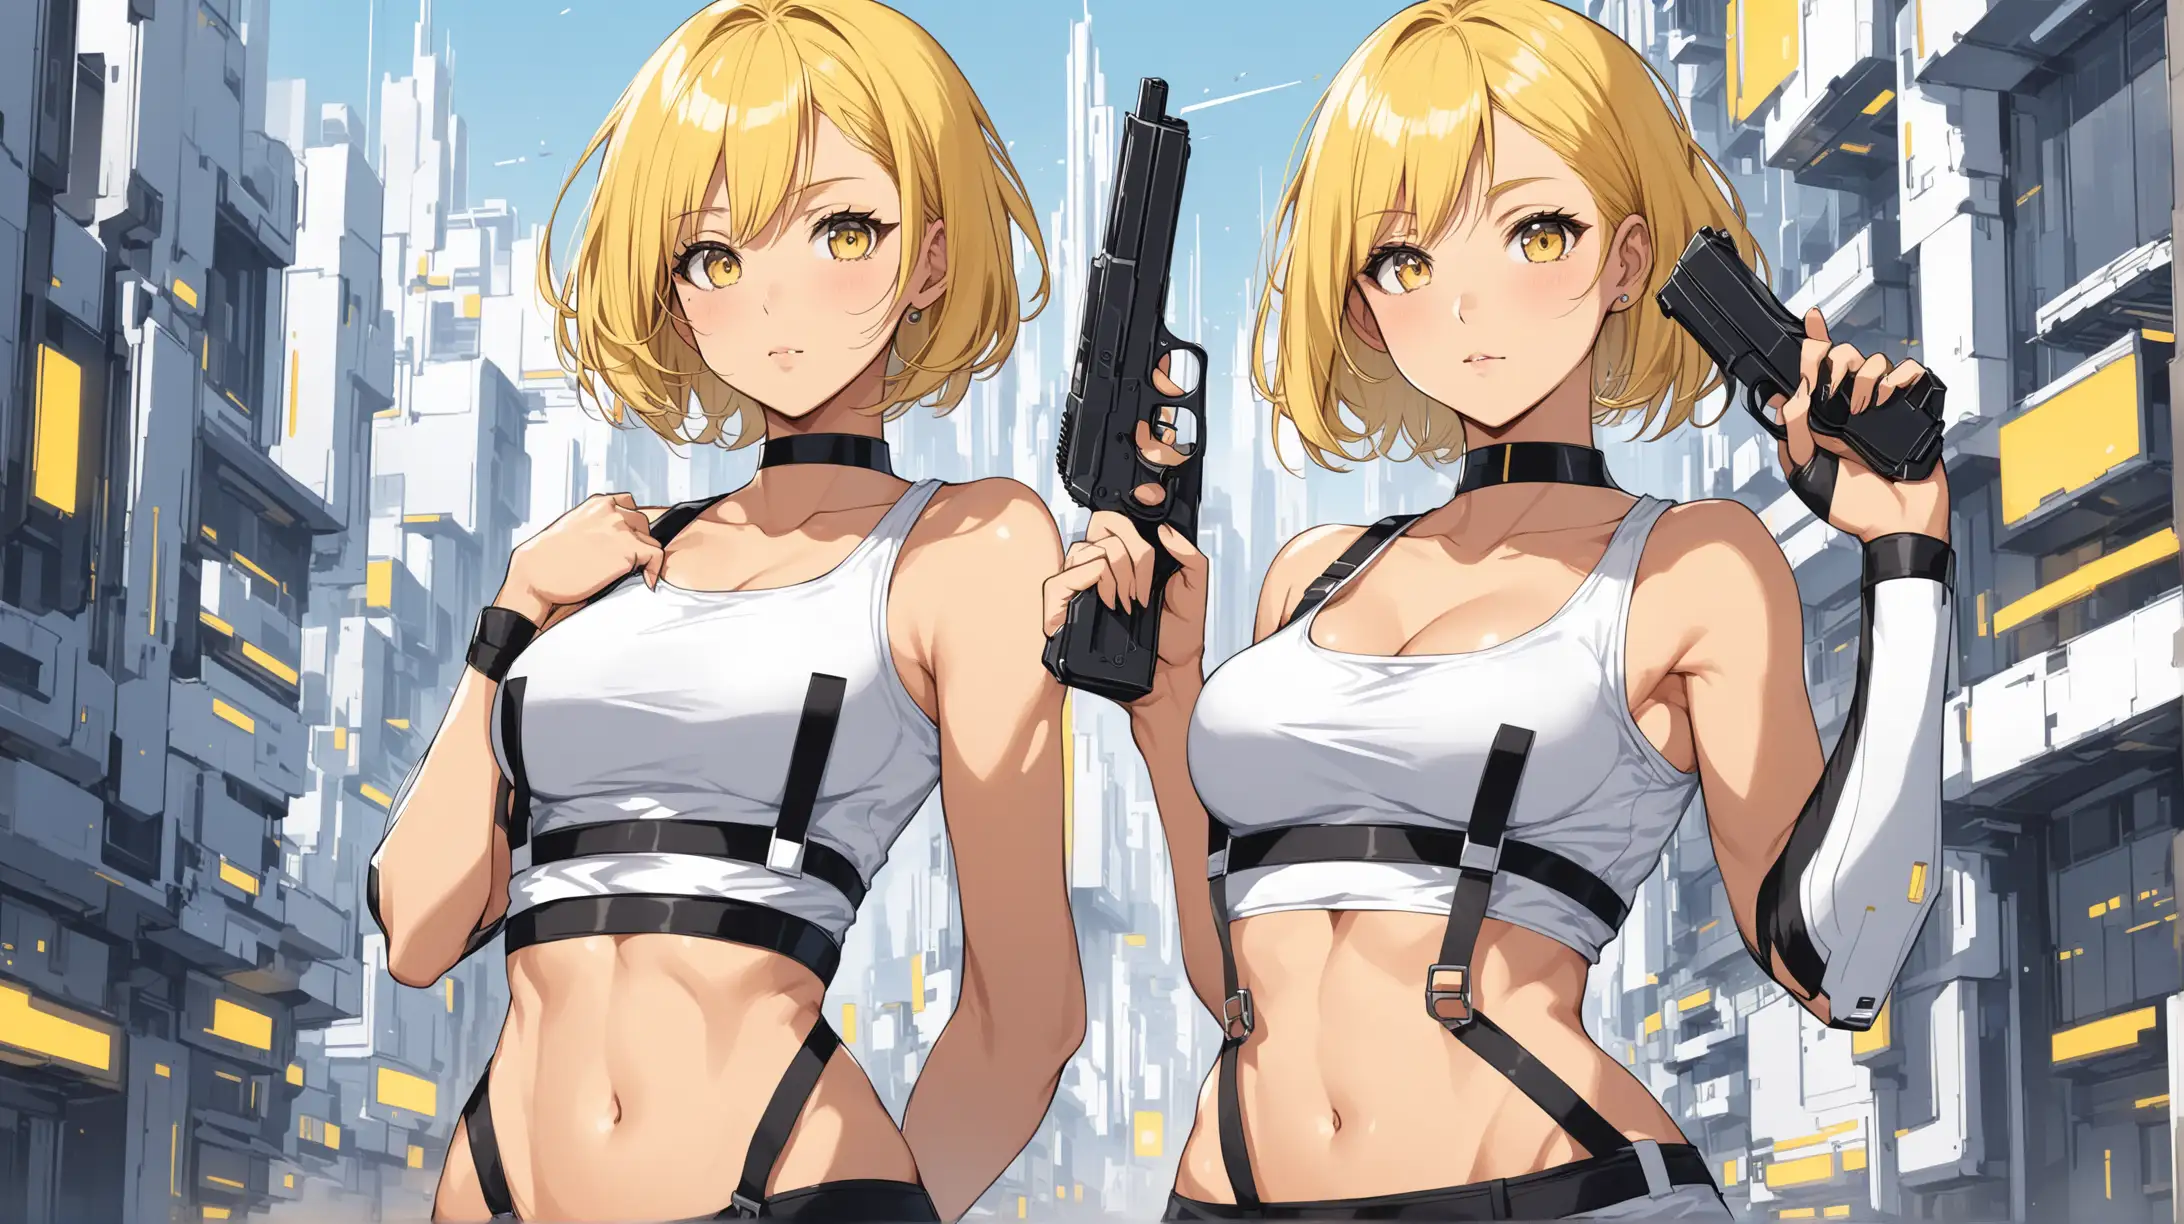 sexy fit 24 year old hero girl, short chin length yellow hair, holding handguns in futuristic town, toned body, short white tank top, sexy midriff, wearing suspenders, yellow black white 3 color minimal design